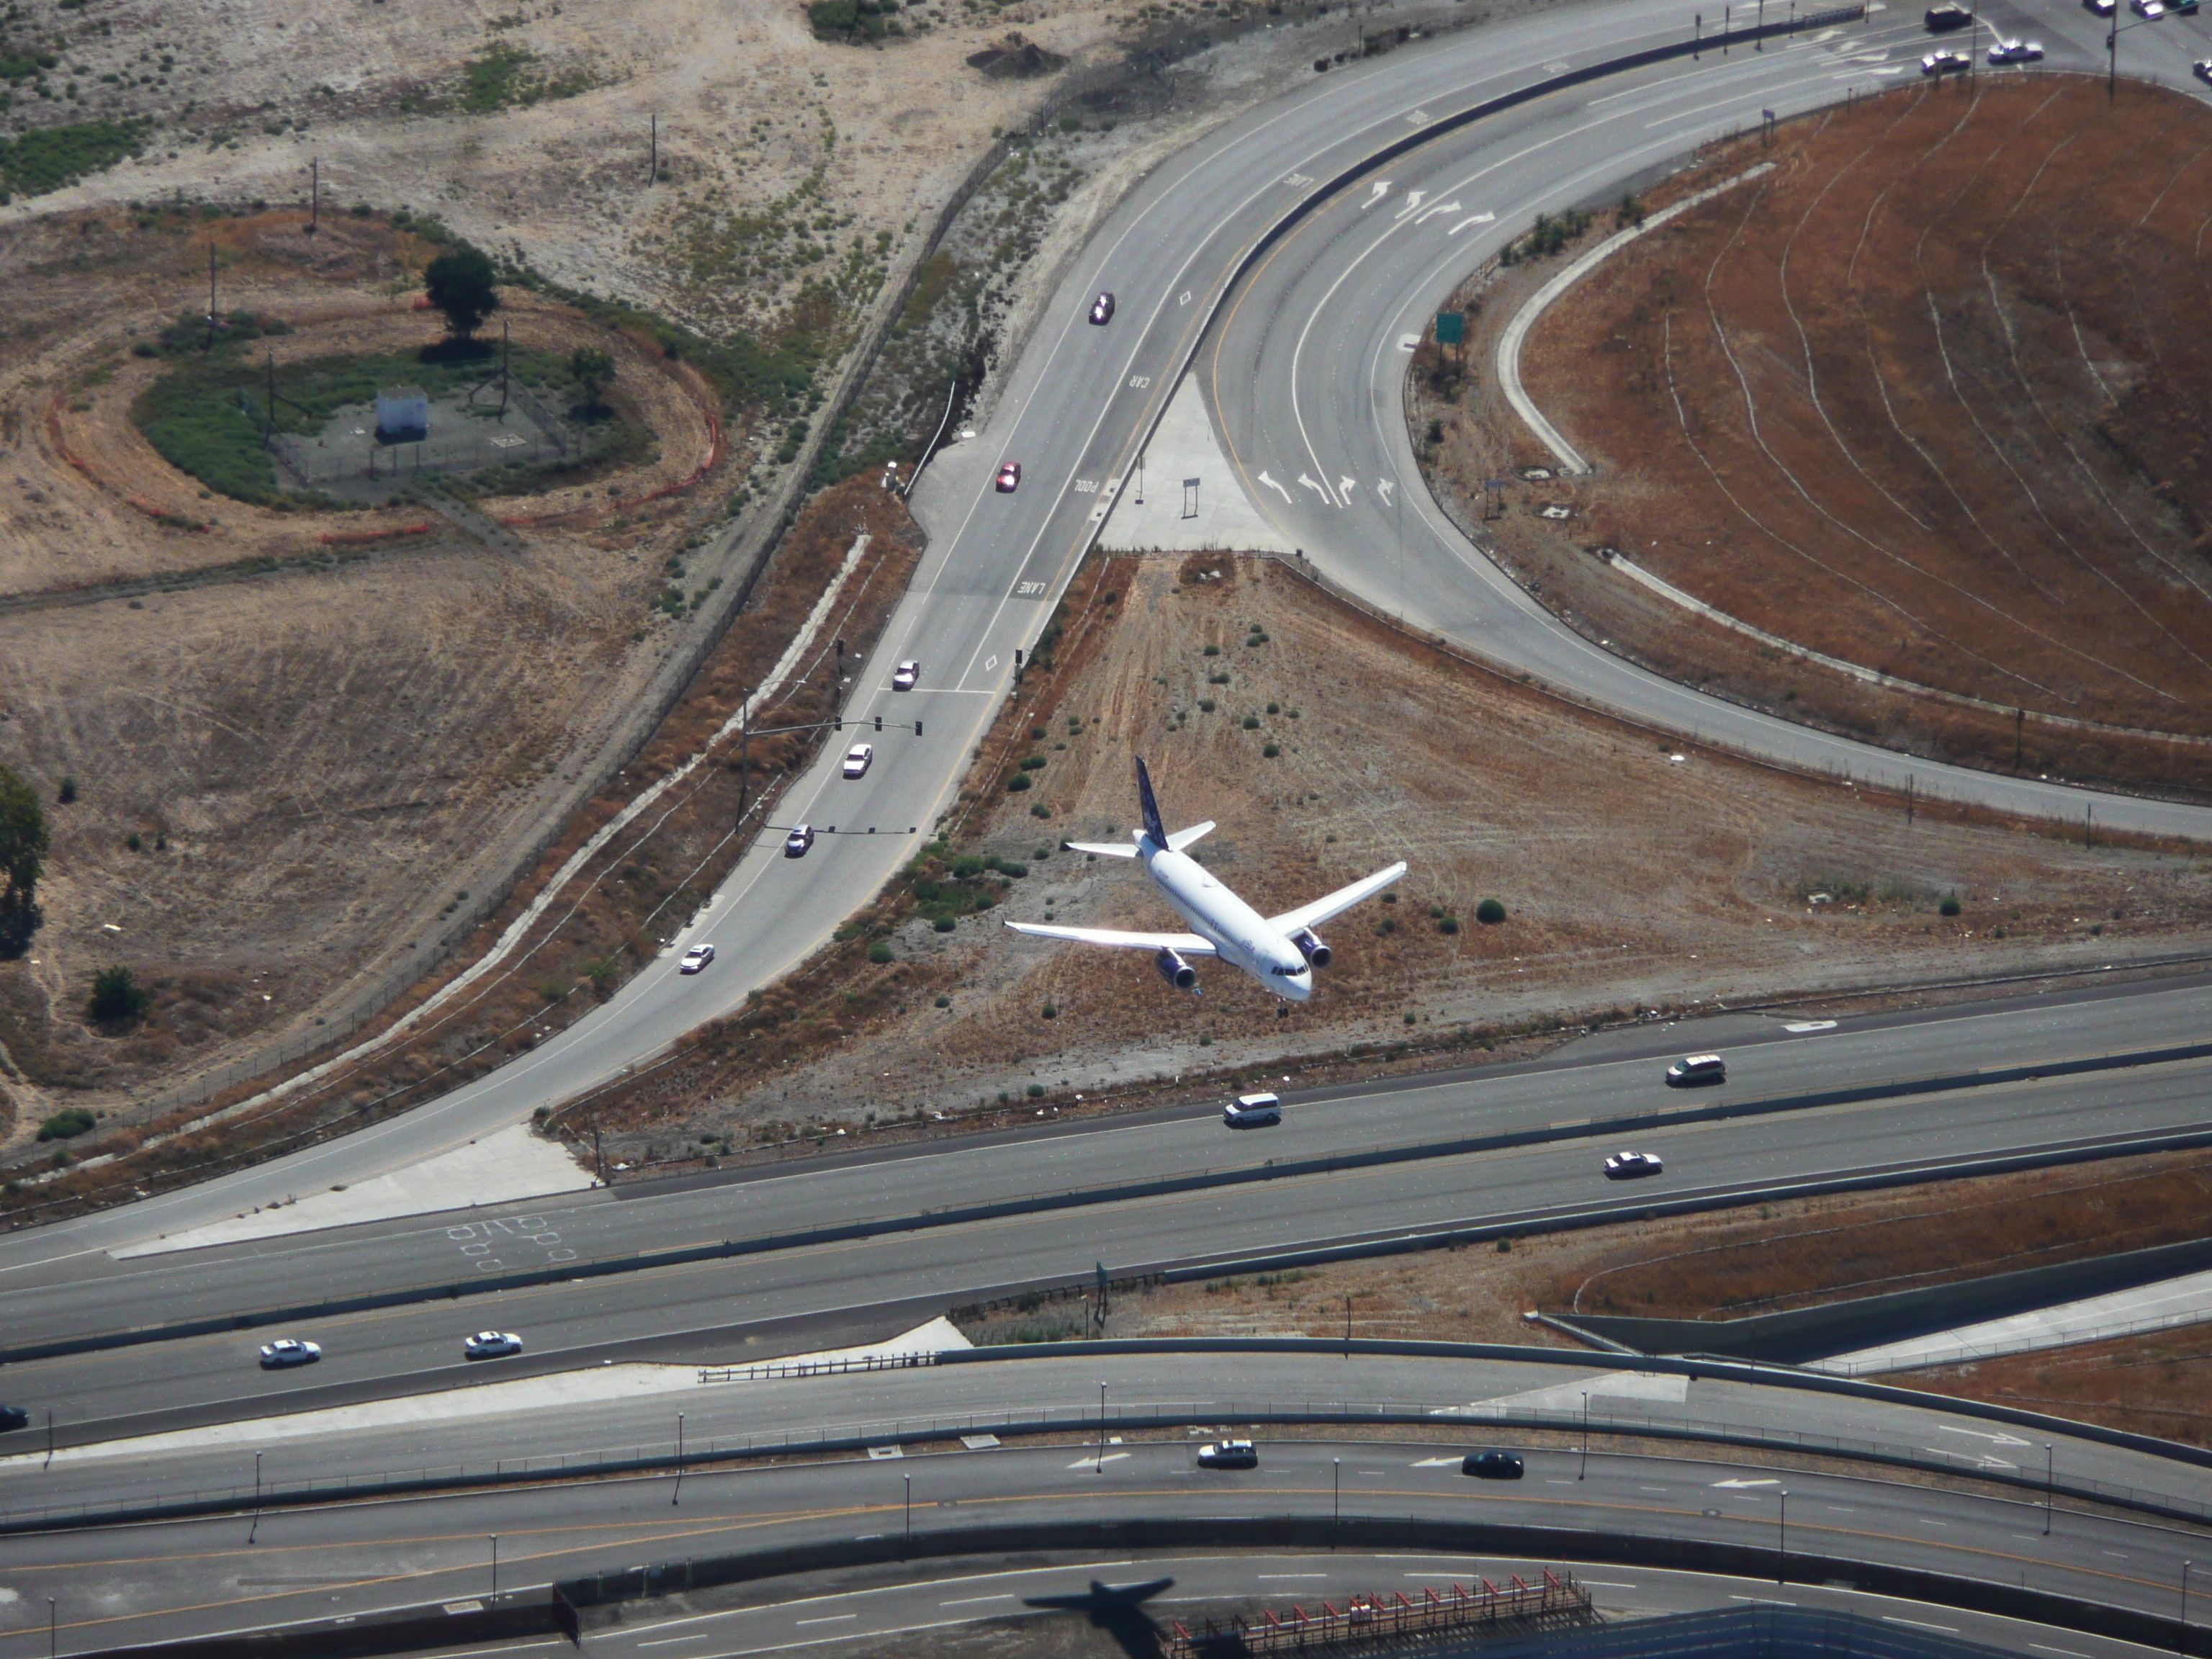 — — - On approach to RWY 30L on September 25, 2010